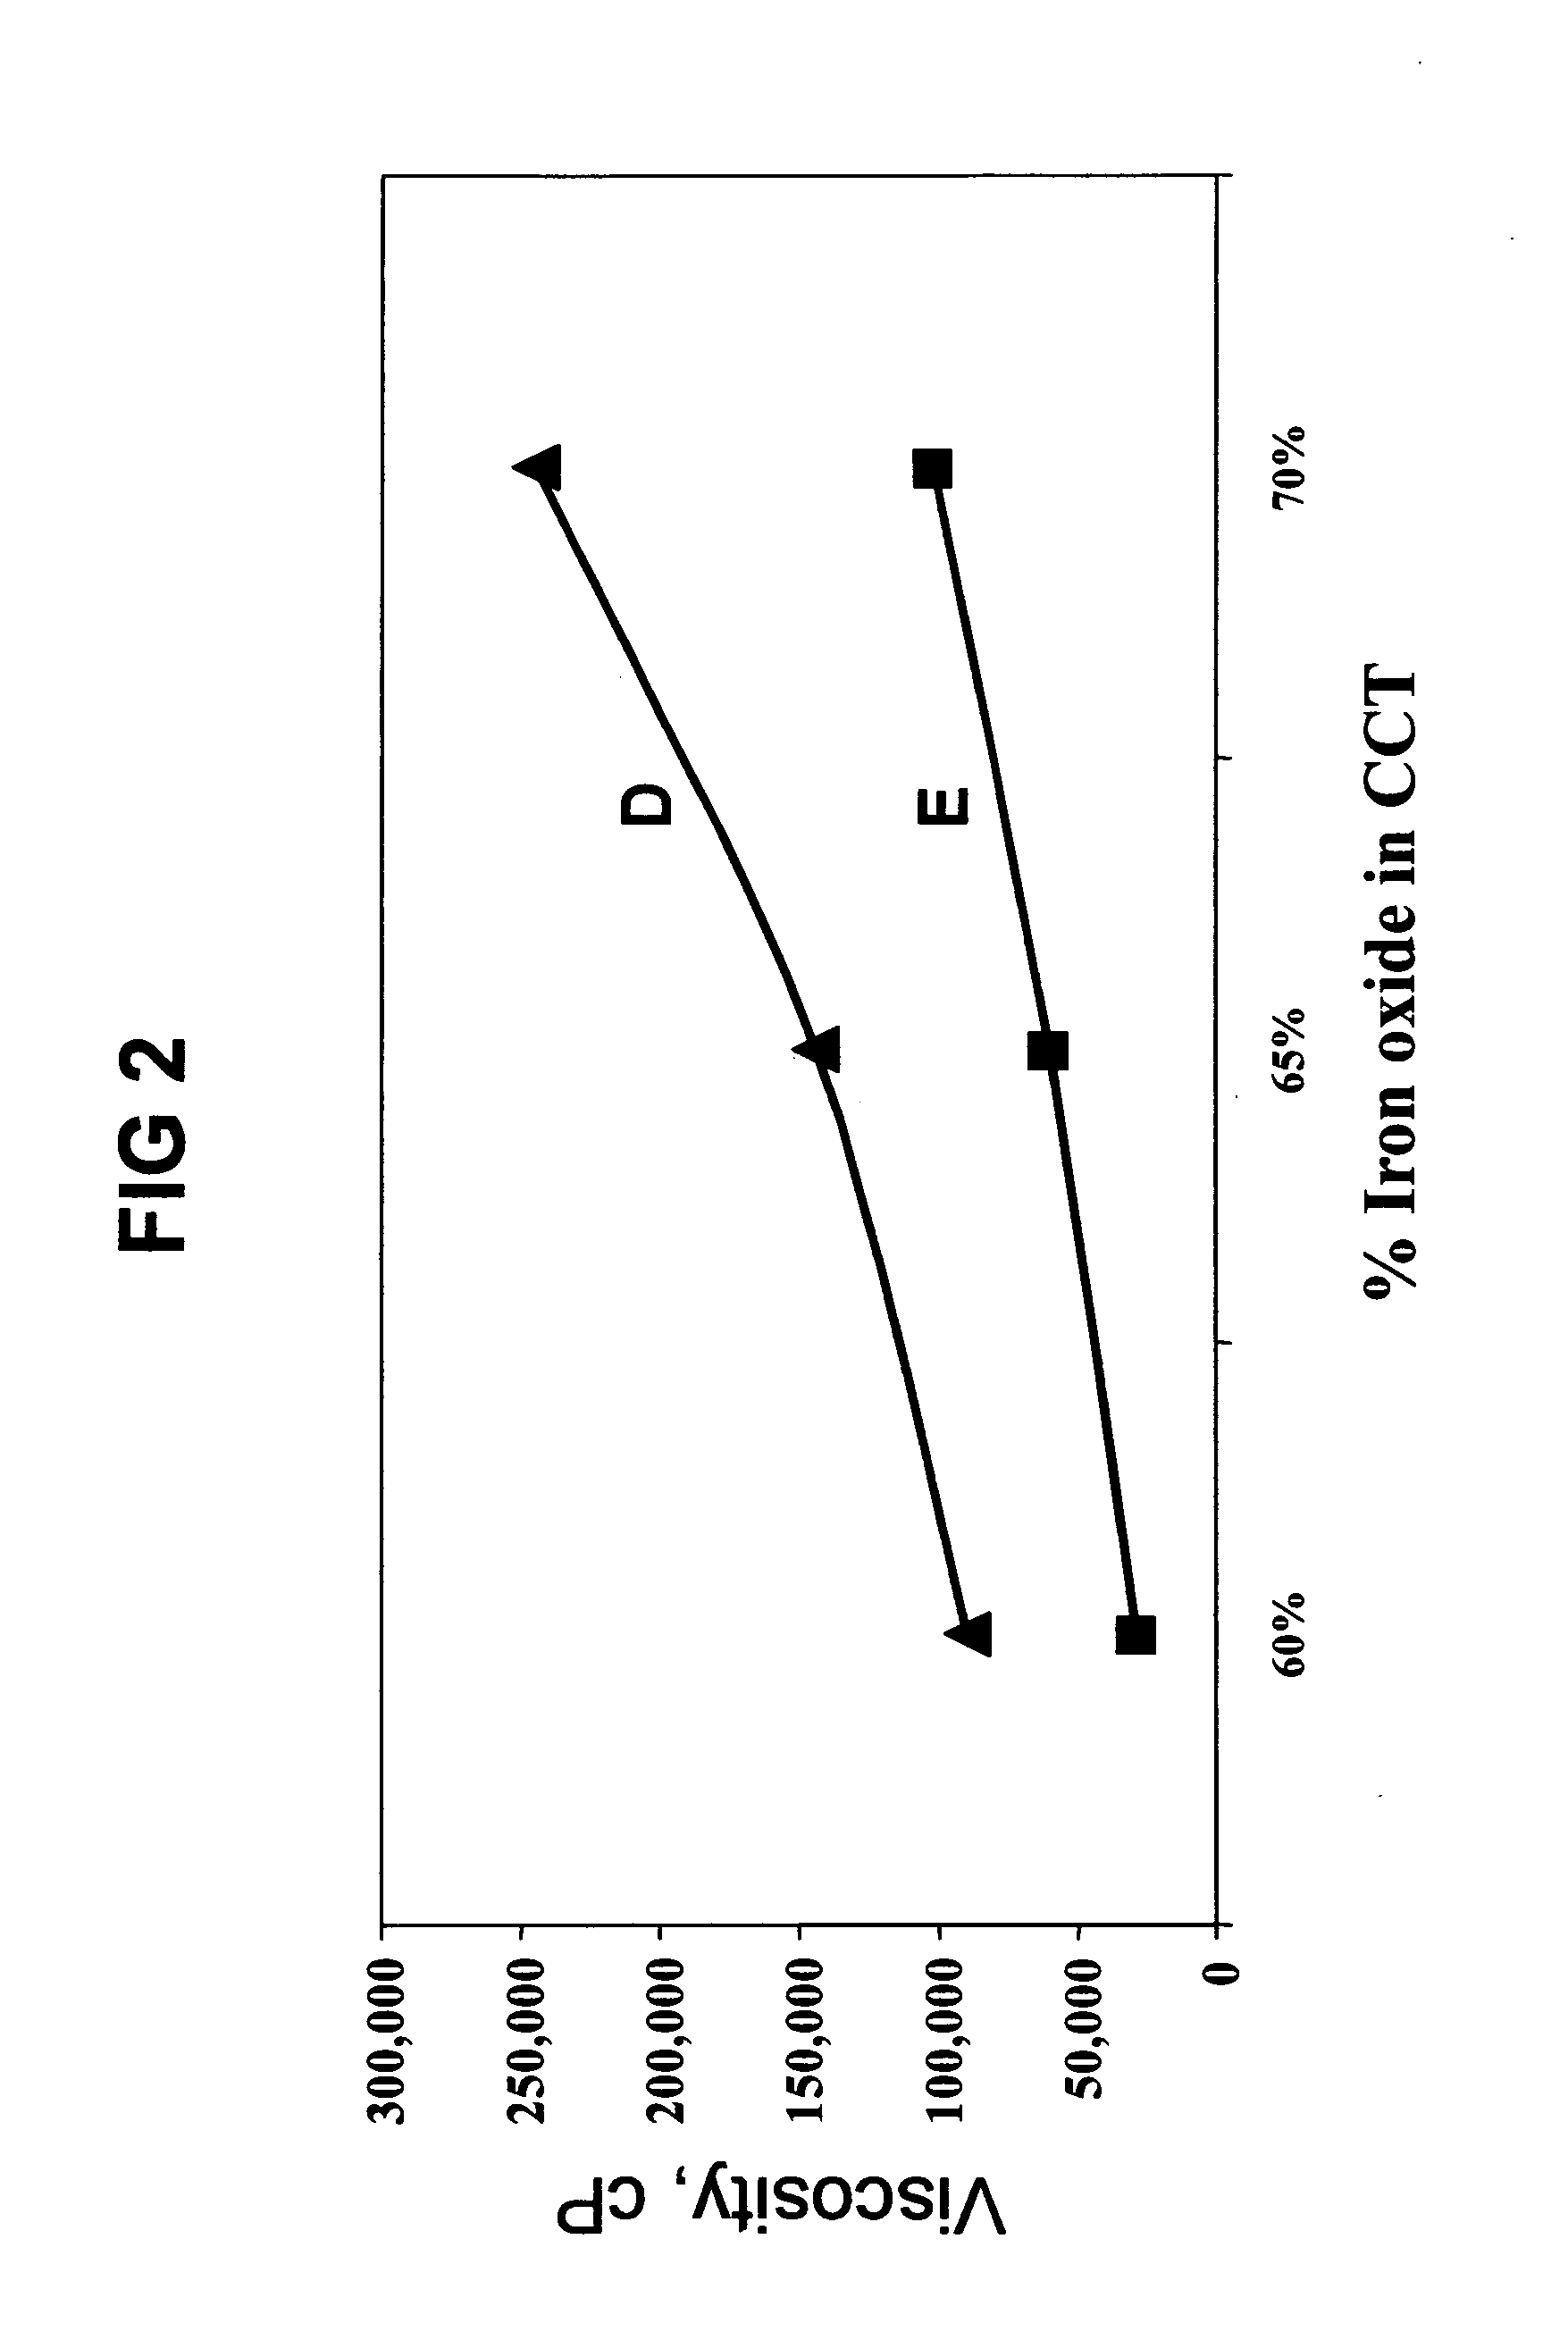 Method and compositions for dispersing particulate solids in oil